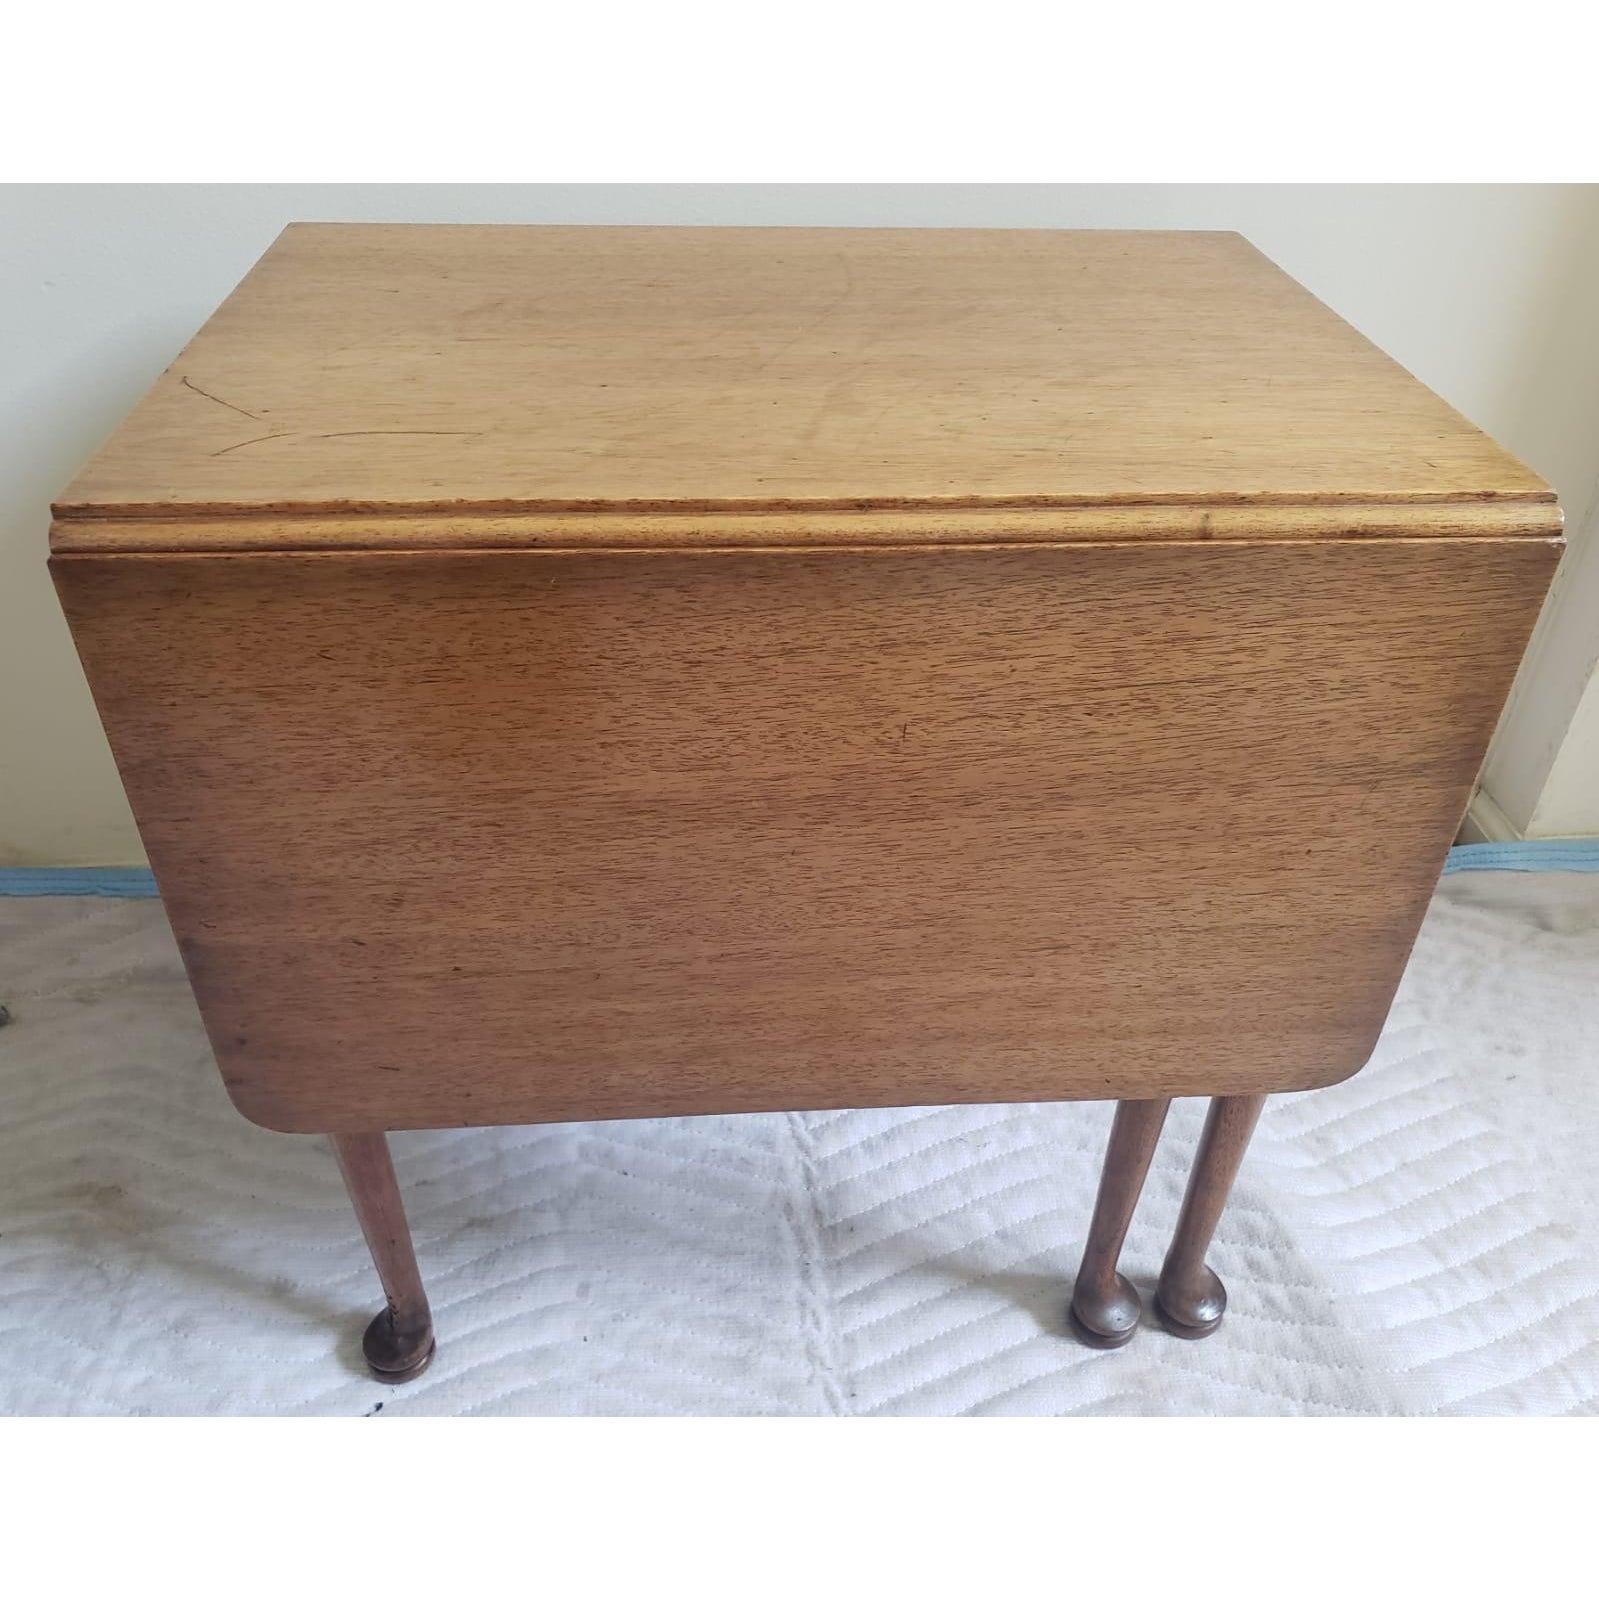 Woodwork 1940s Biggs Kittinger Chippendale Mahogany Drop Leaf Side Table For Sale